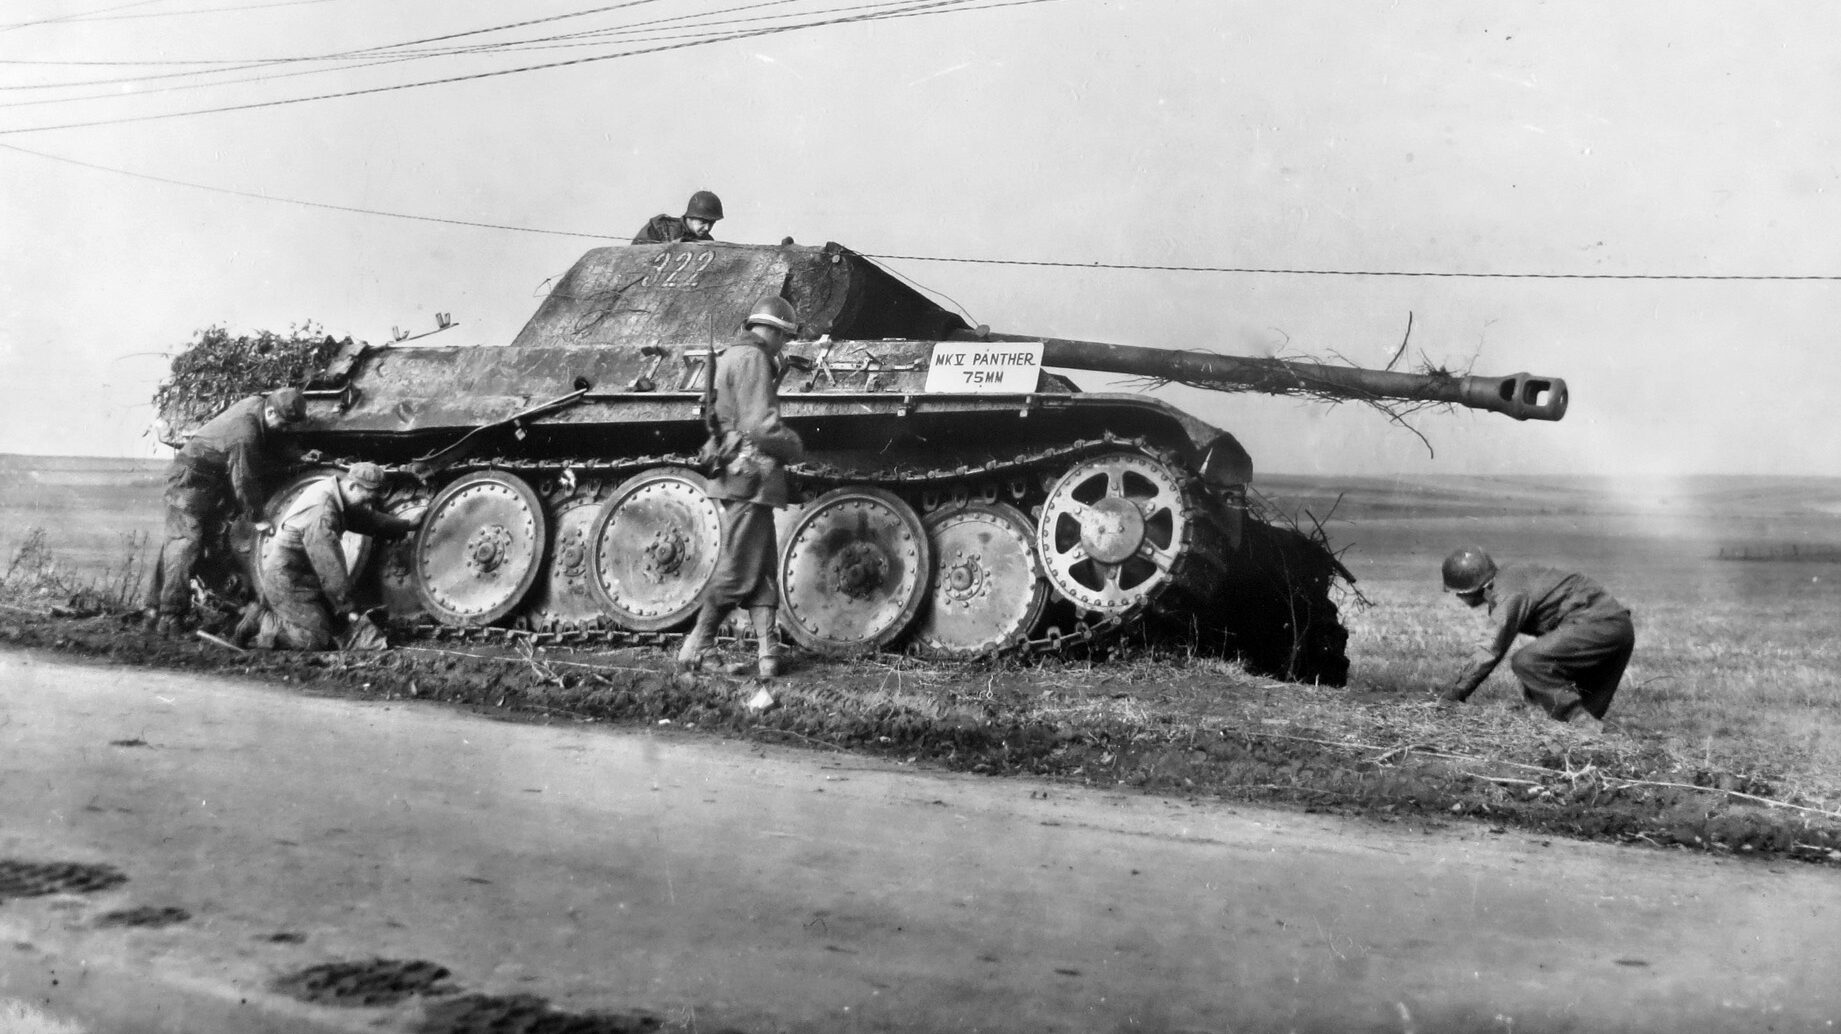 GIs inspect this Panther tank of Panzer Brigade 106, disabled during the Battle of Mairy. A sign has been placed on the tank to familiarize passing troops. 